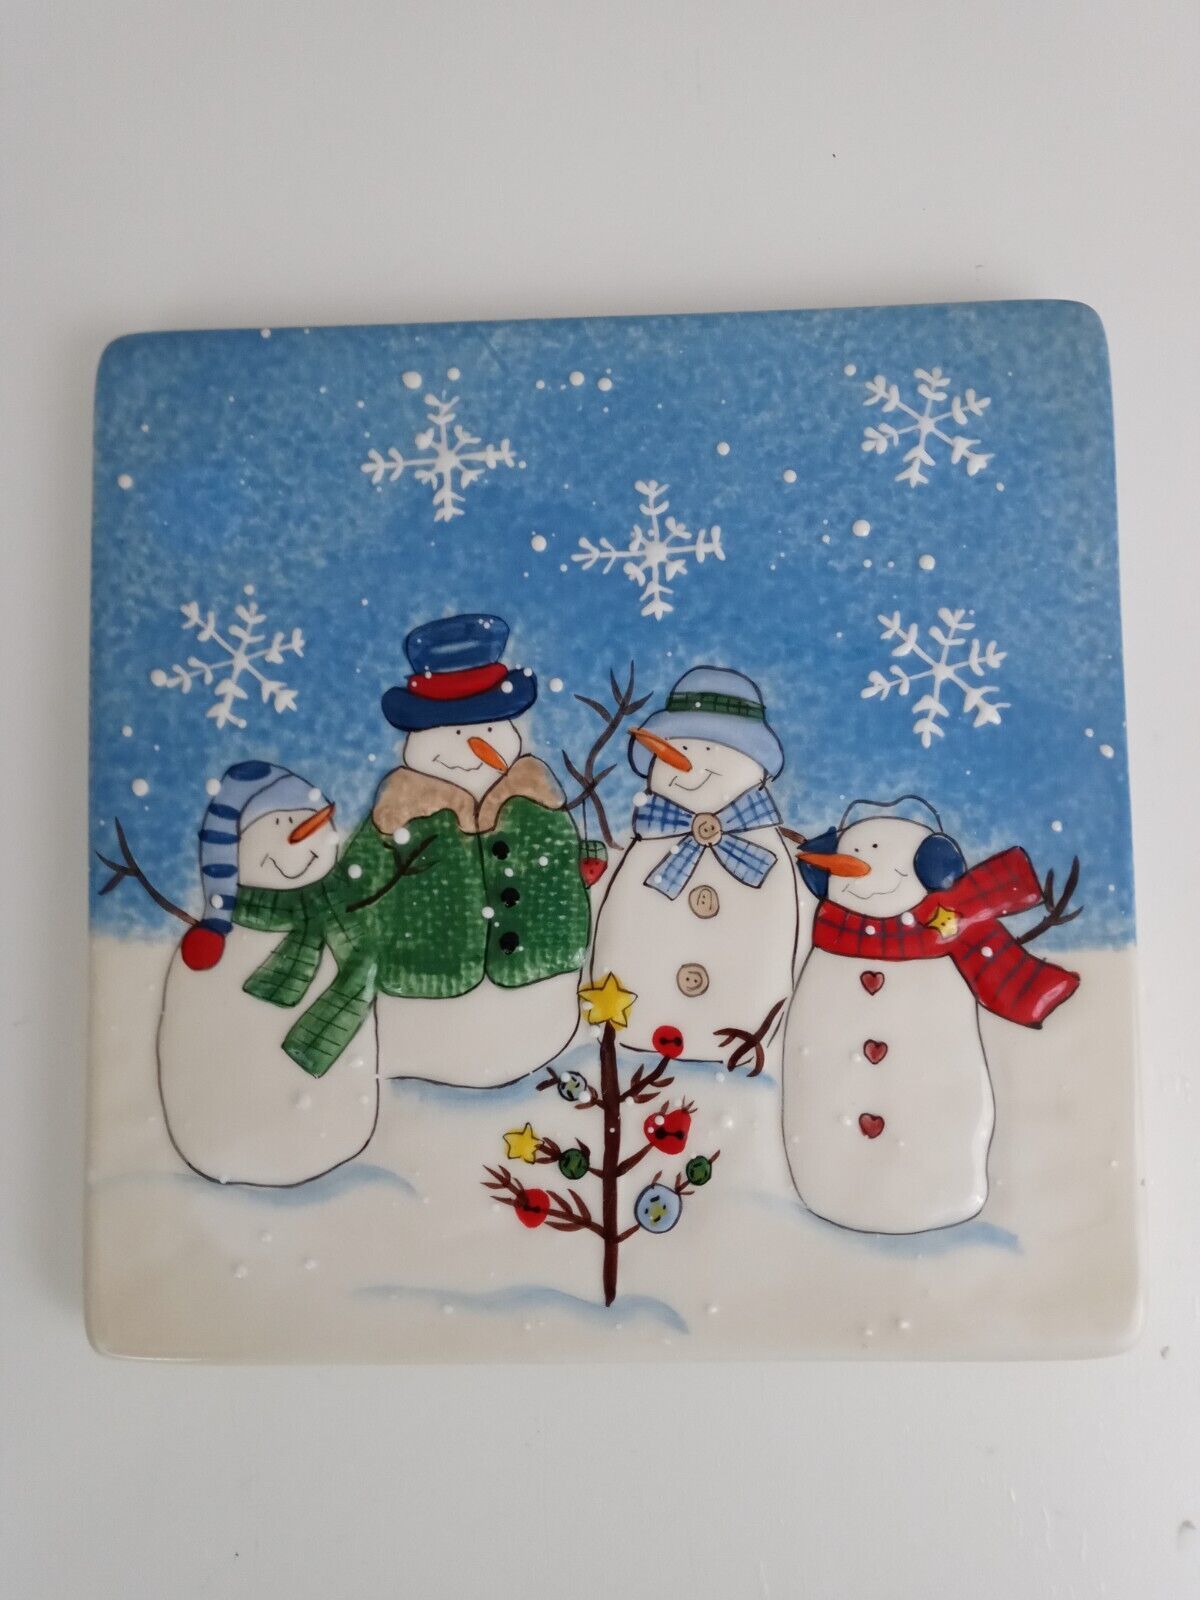 Primary image for St Nicholas Square "Button Up" Snowman Christmas Trivet Wall Hanging 7x7 (A)